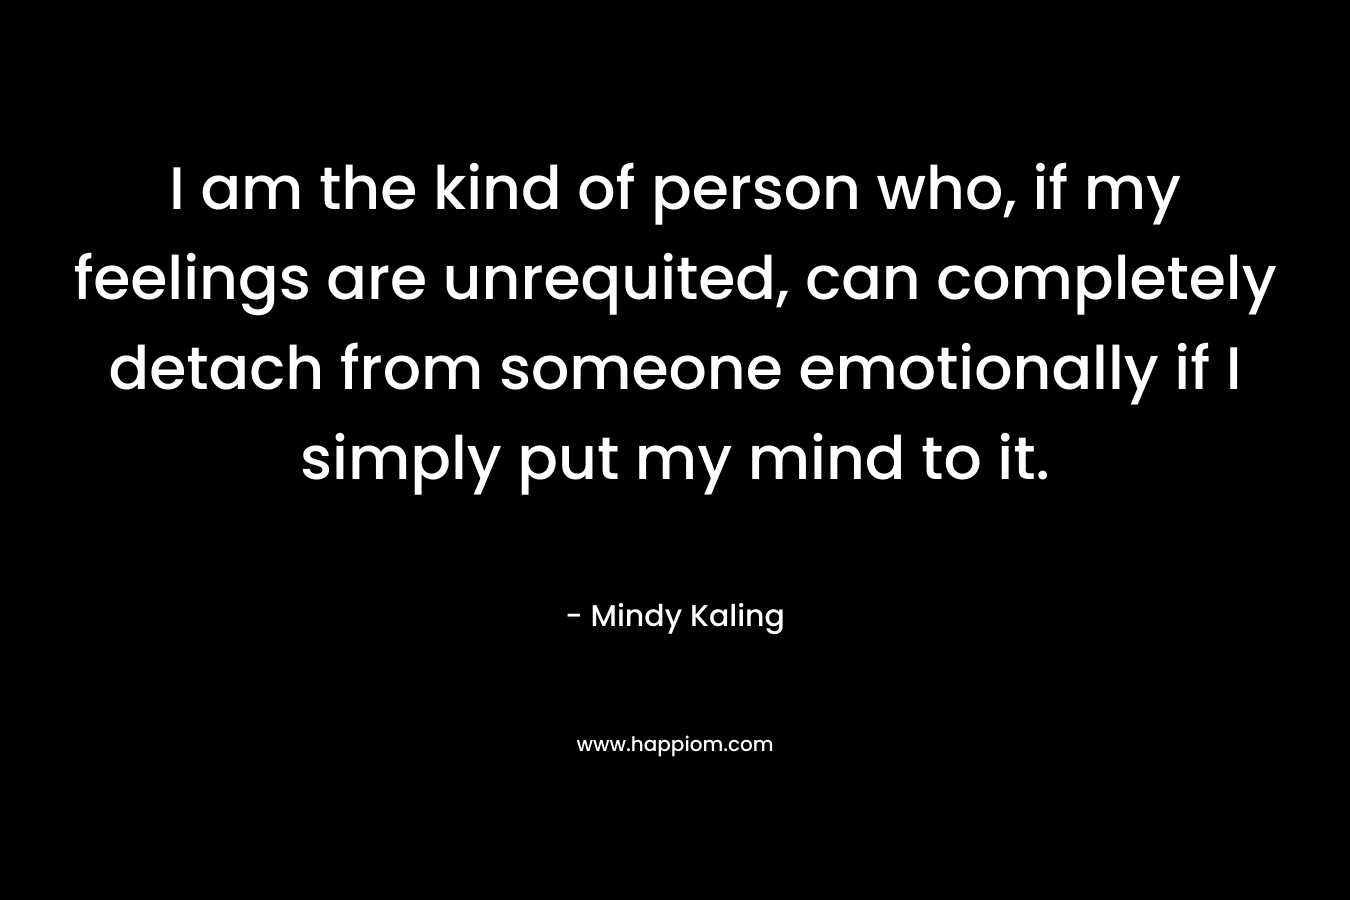 I am the kind of person who, if my feelings are unrequited, can completely detach from someone emotionally if I simply put my mind to it. – Mindy Kaling